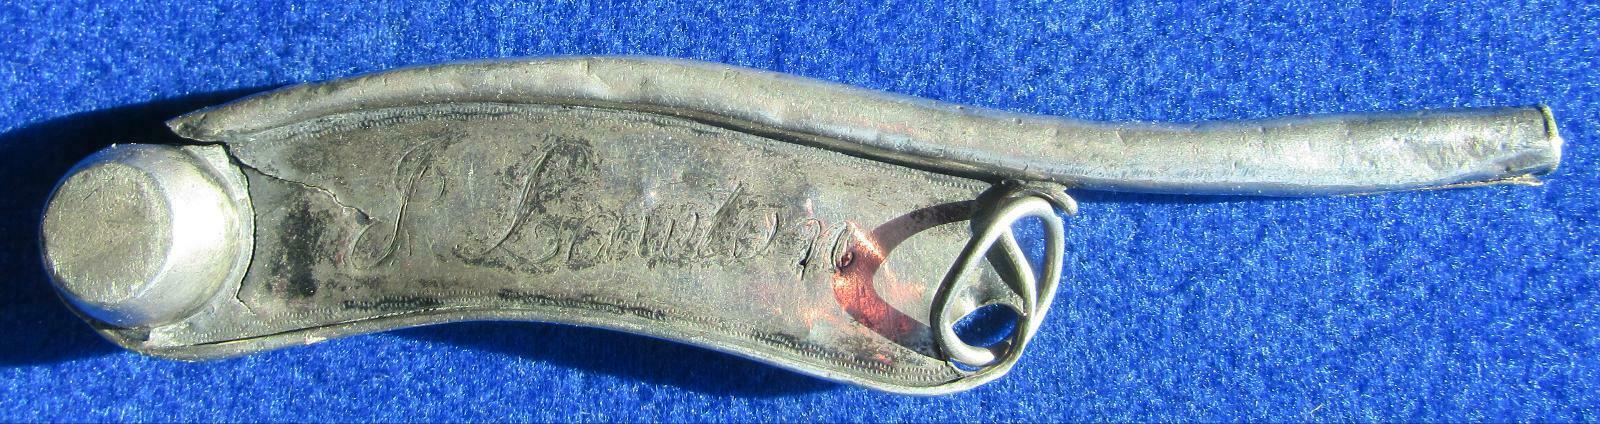 Antique Silver Boson’s  whistle Name and Ship Engraving early 19th cent.